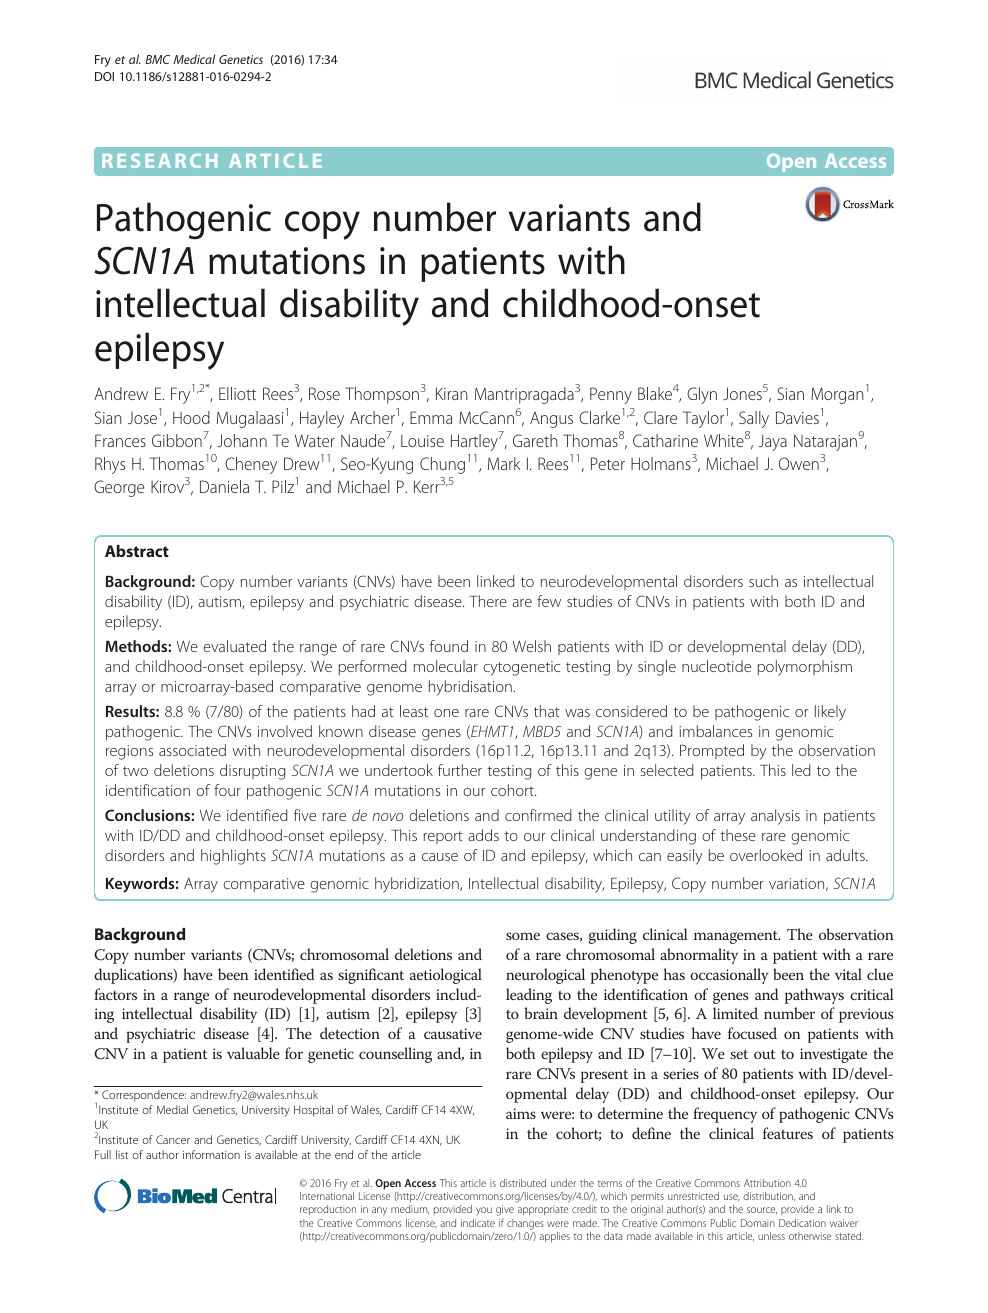 Pathogenic Copy Number Variants And Scn1a Mutations In Patients With Intellectual Disability And Childhood Onset Epilepsy Topic Of Research Paper In Clinical Medicine Download Scholarly Article Pdf And Read For Free On